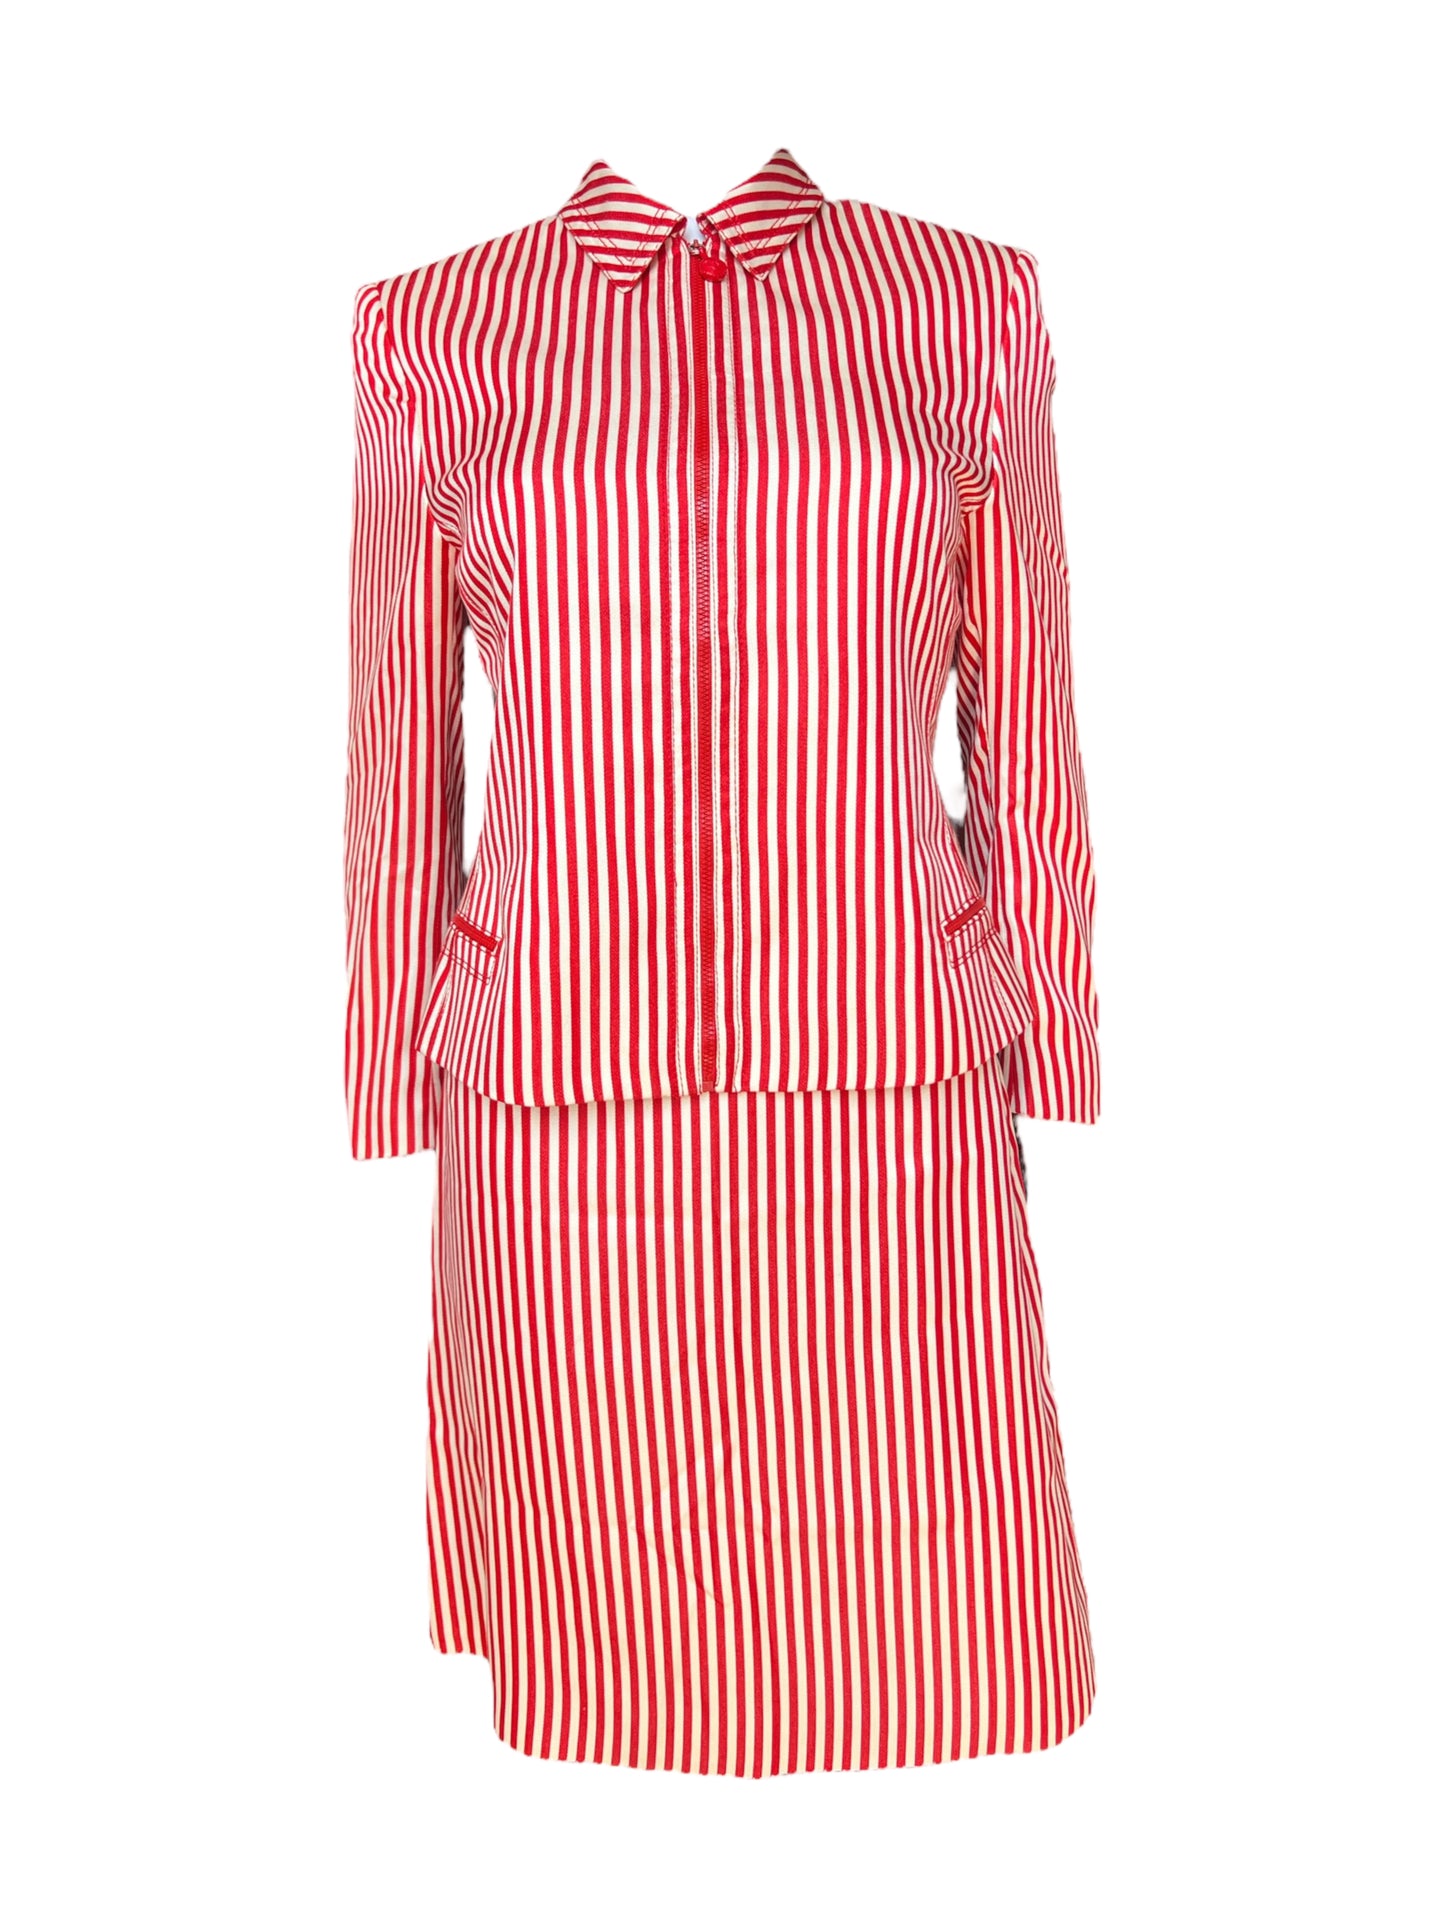 Gianni Versace Couture SS1993 Red/White Pinstripe Jacket and Skirt Set